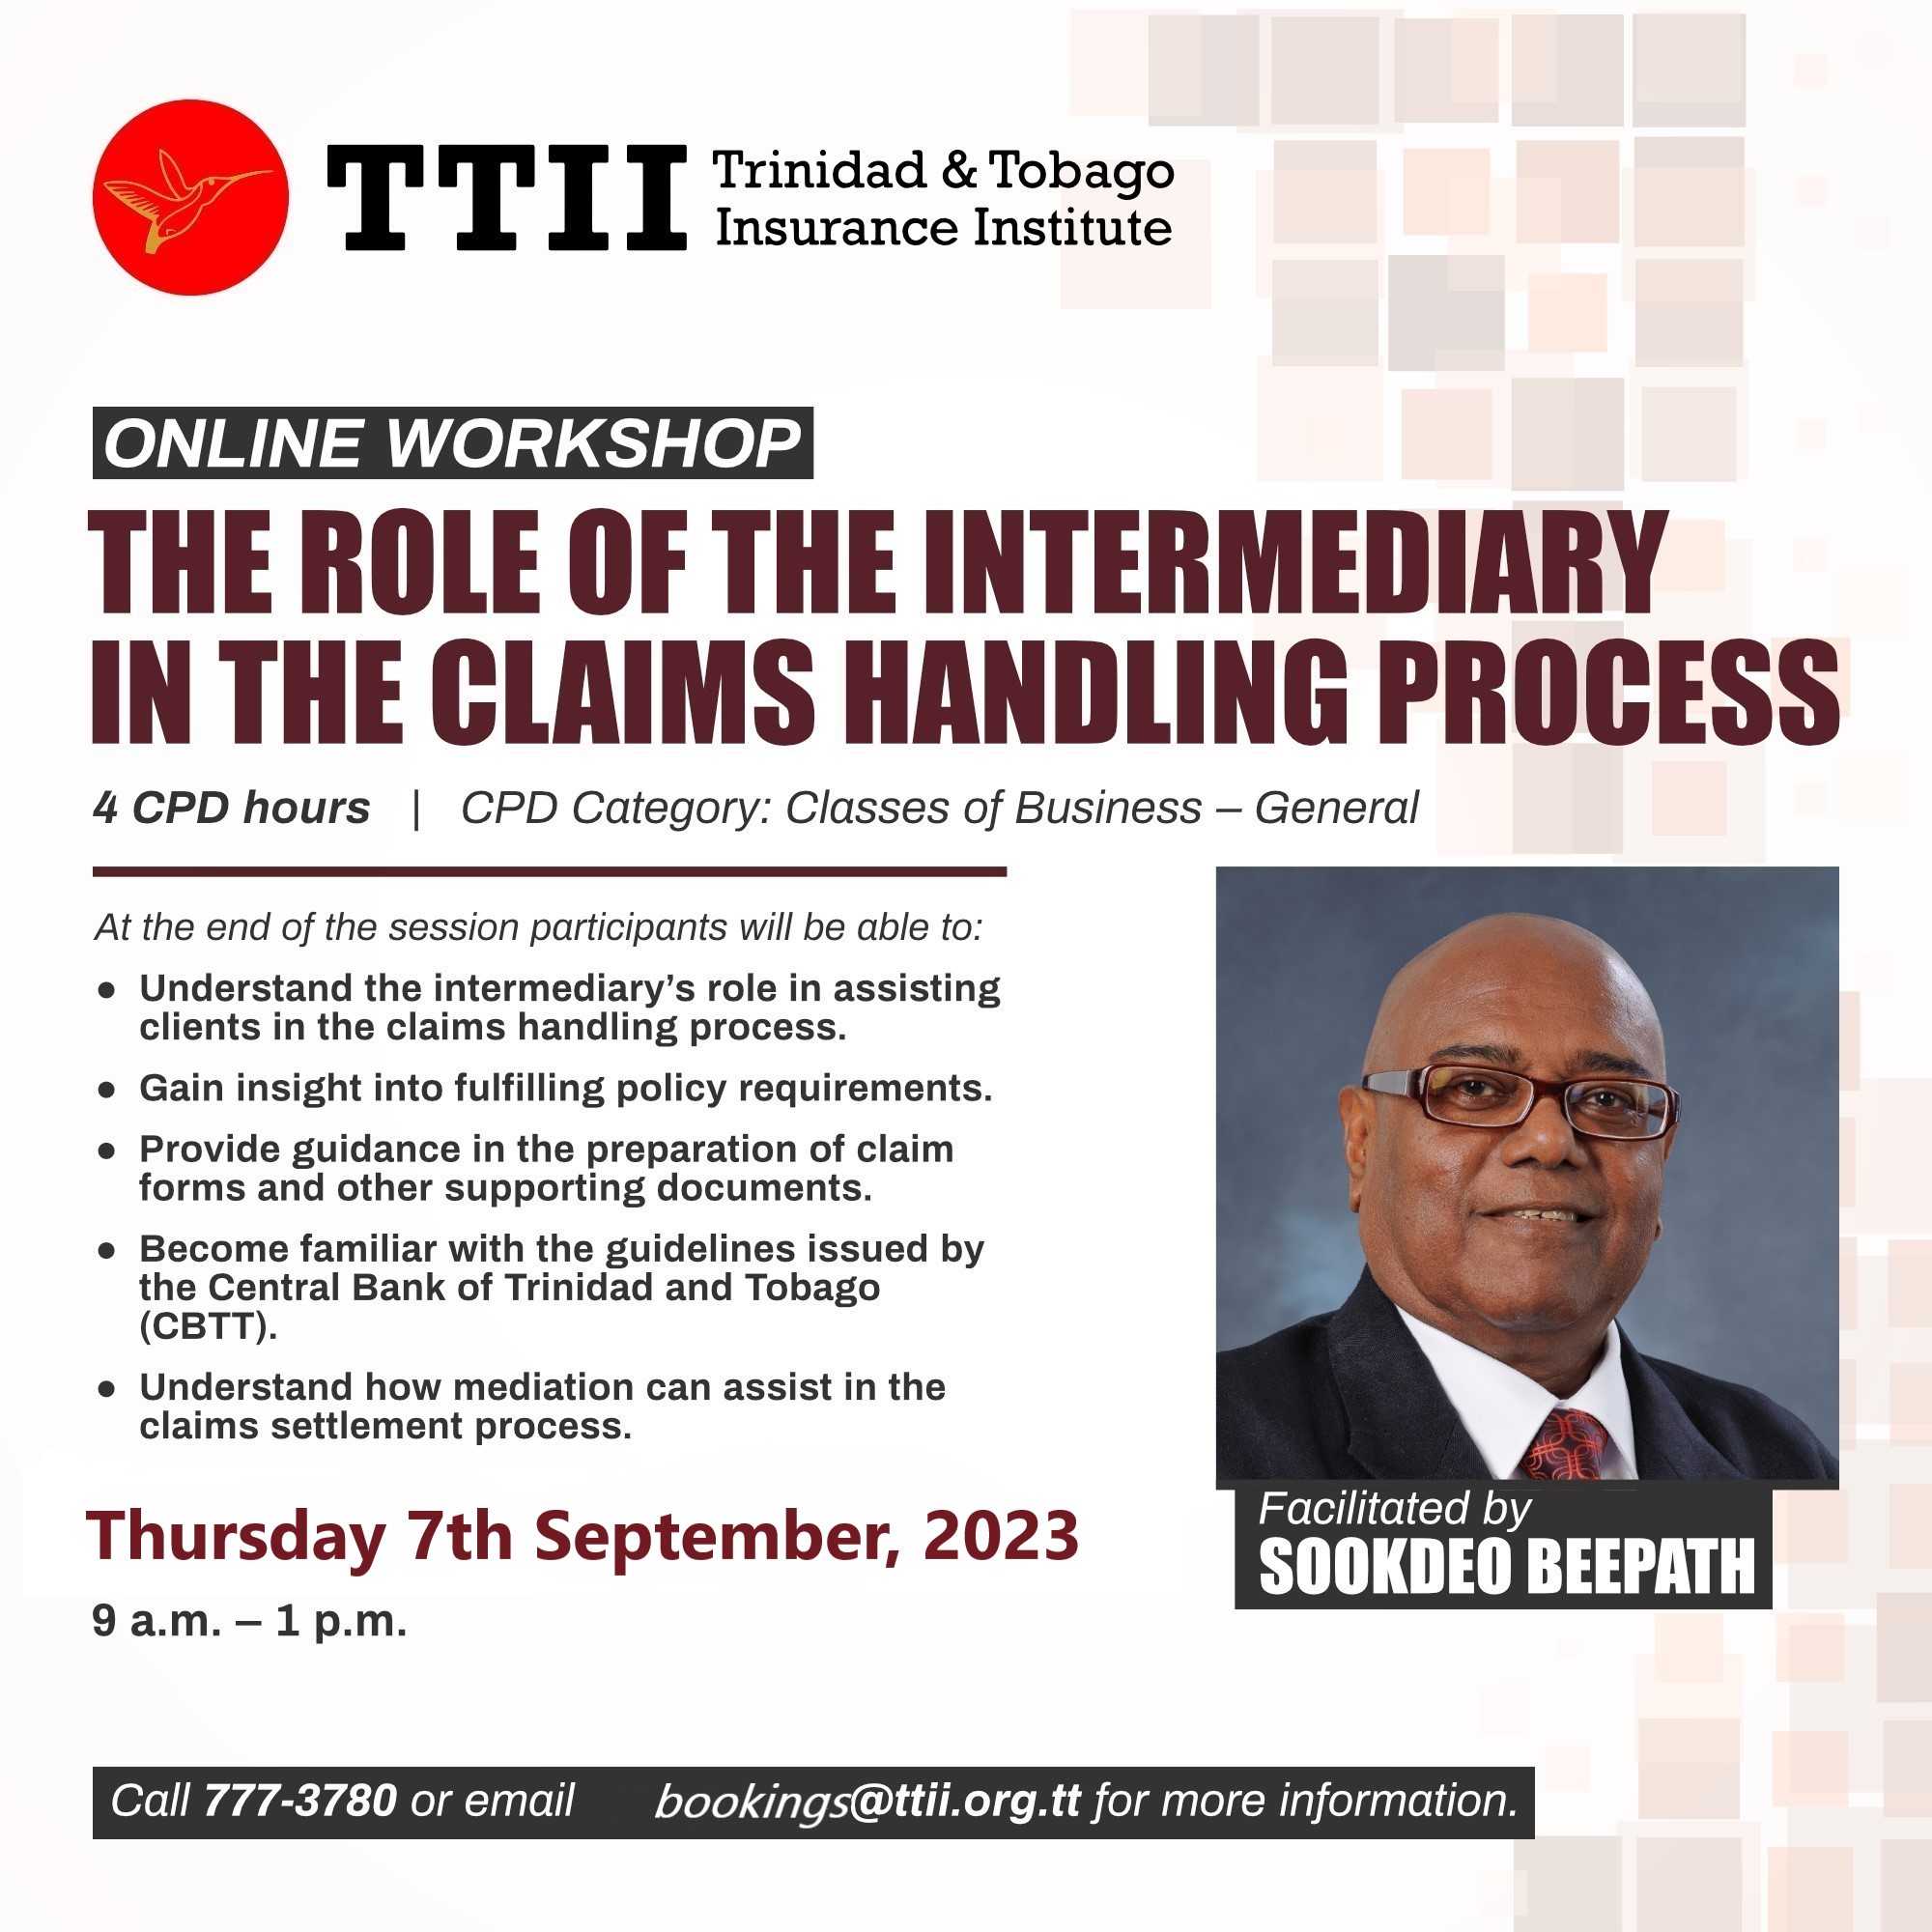 The Role of the Intermediary in the General Claims Handling Process